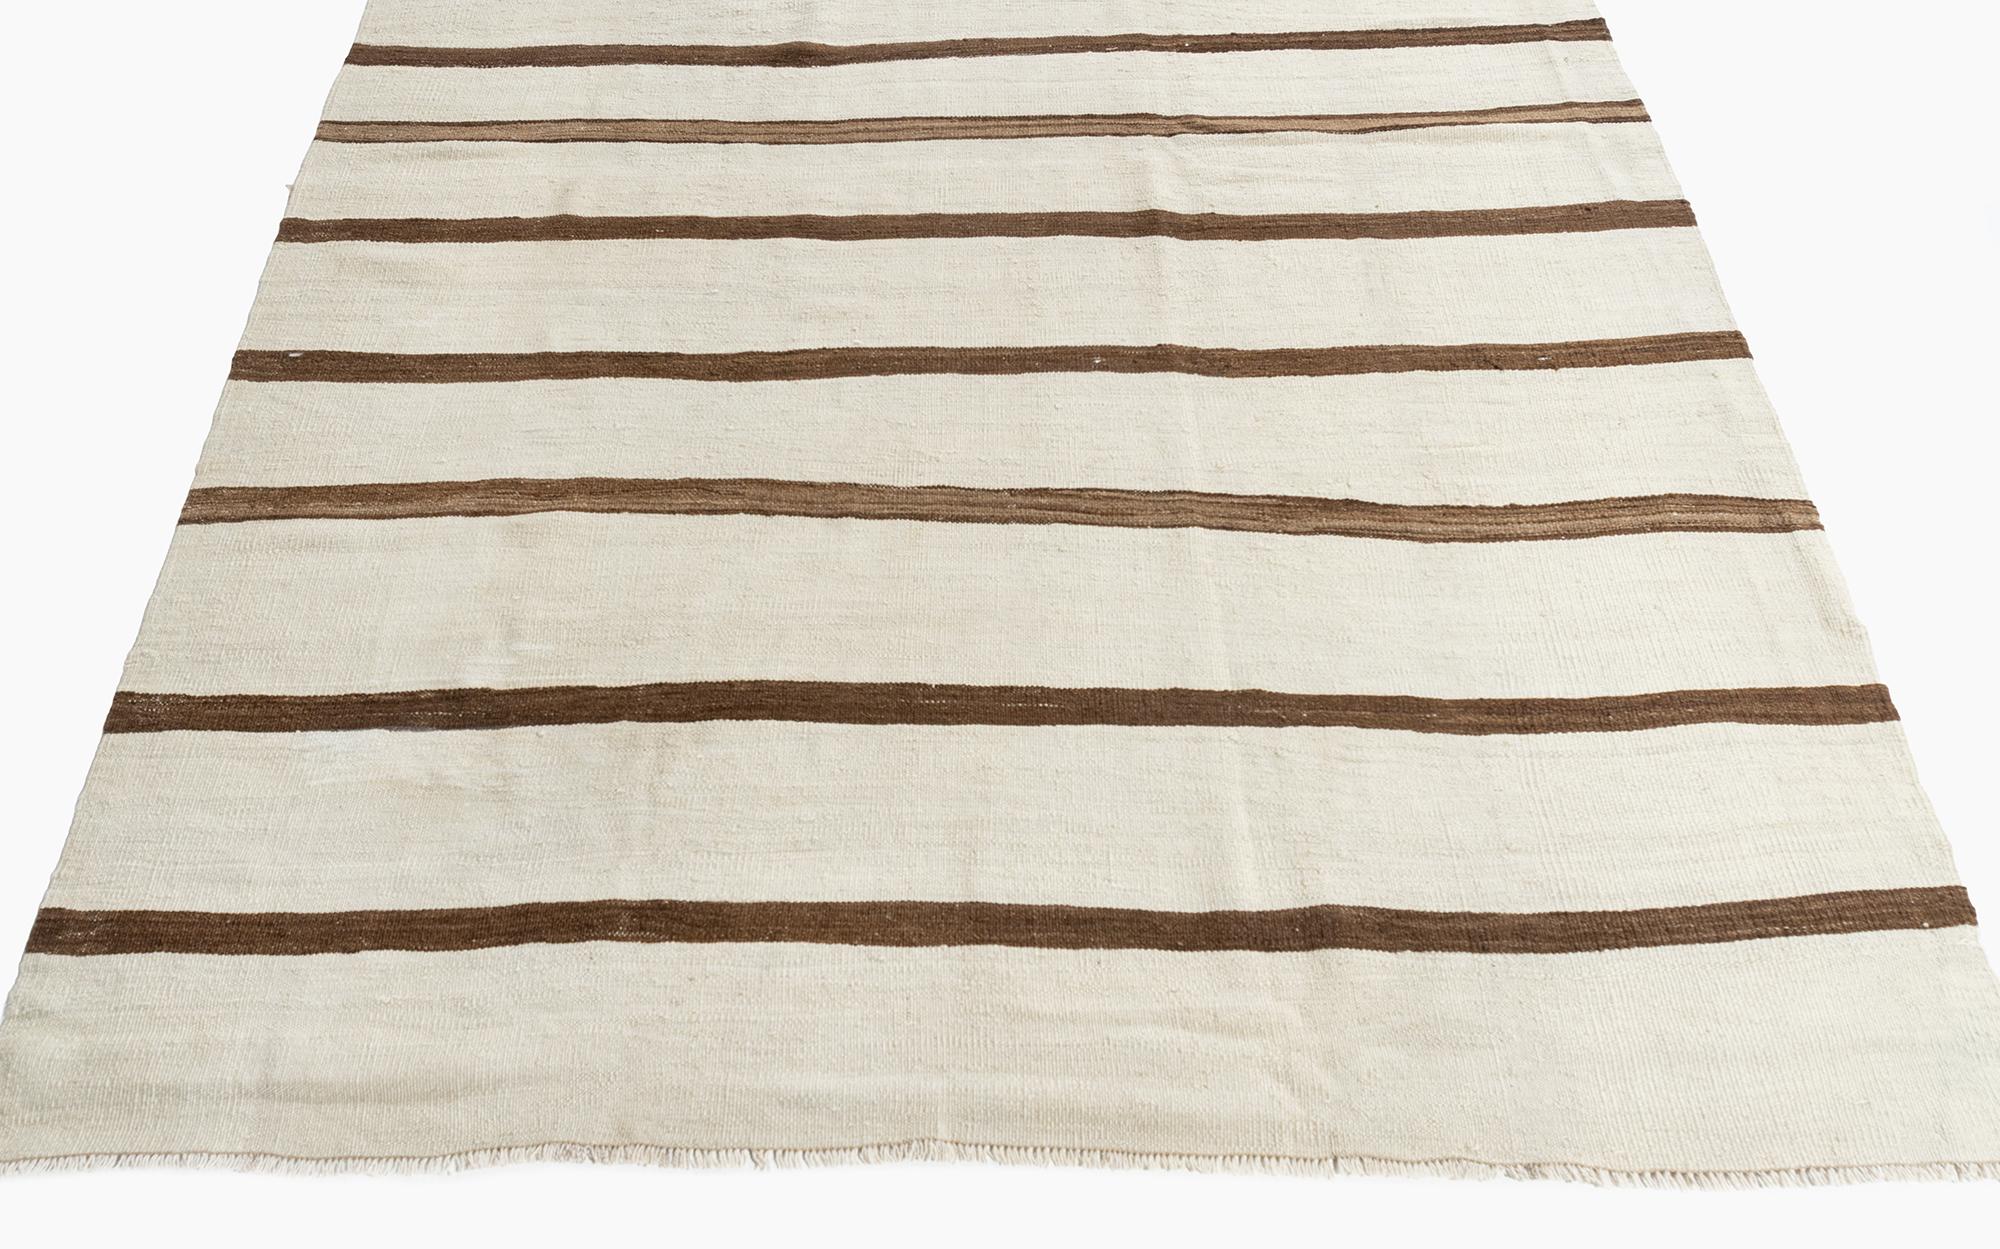 Vintage Ivory Turkish Kilim Runner 4'11 X 13'8 In Good Condition For Sale In New York, NY